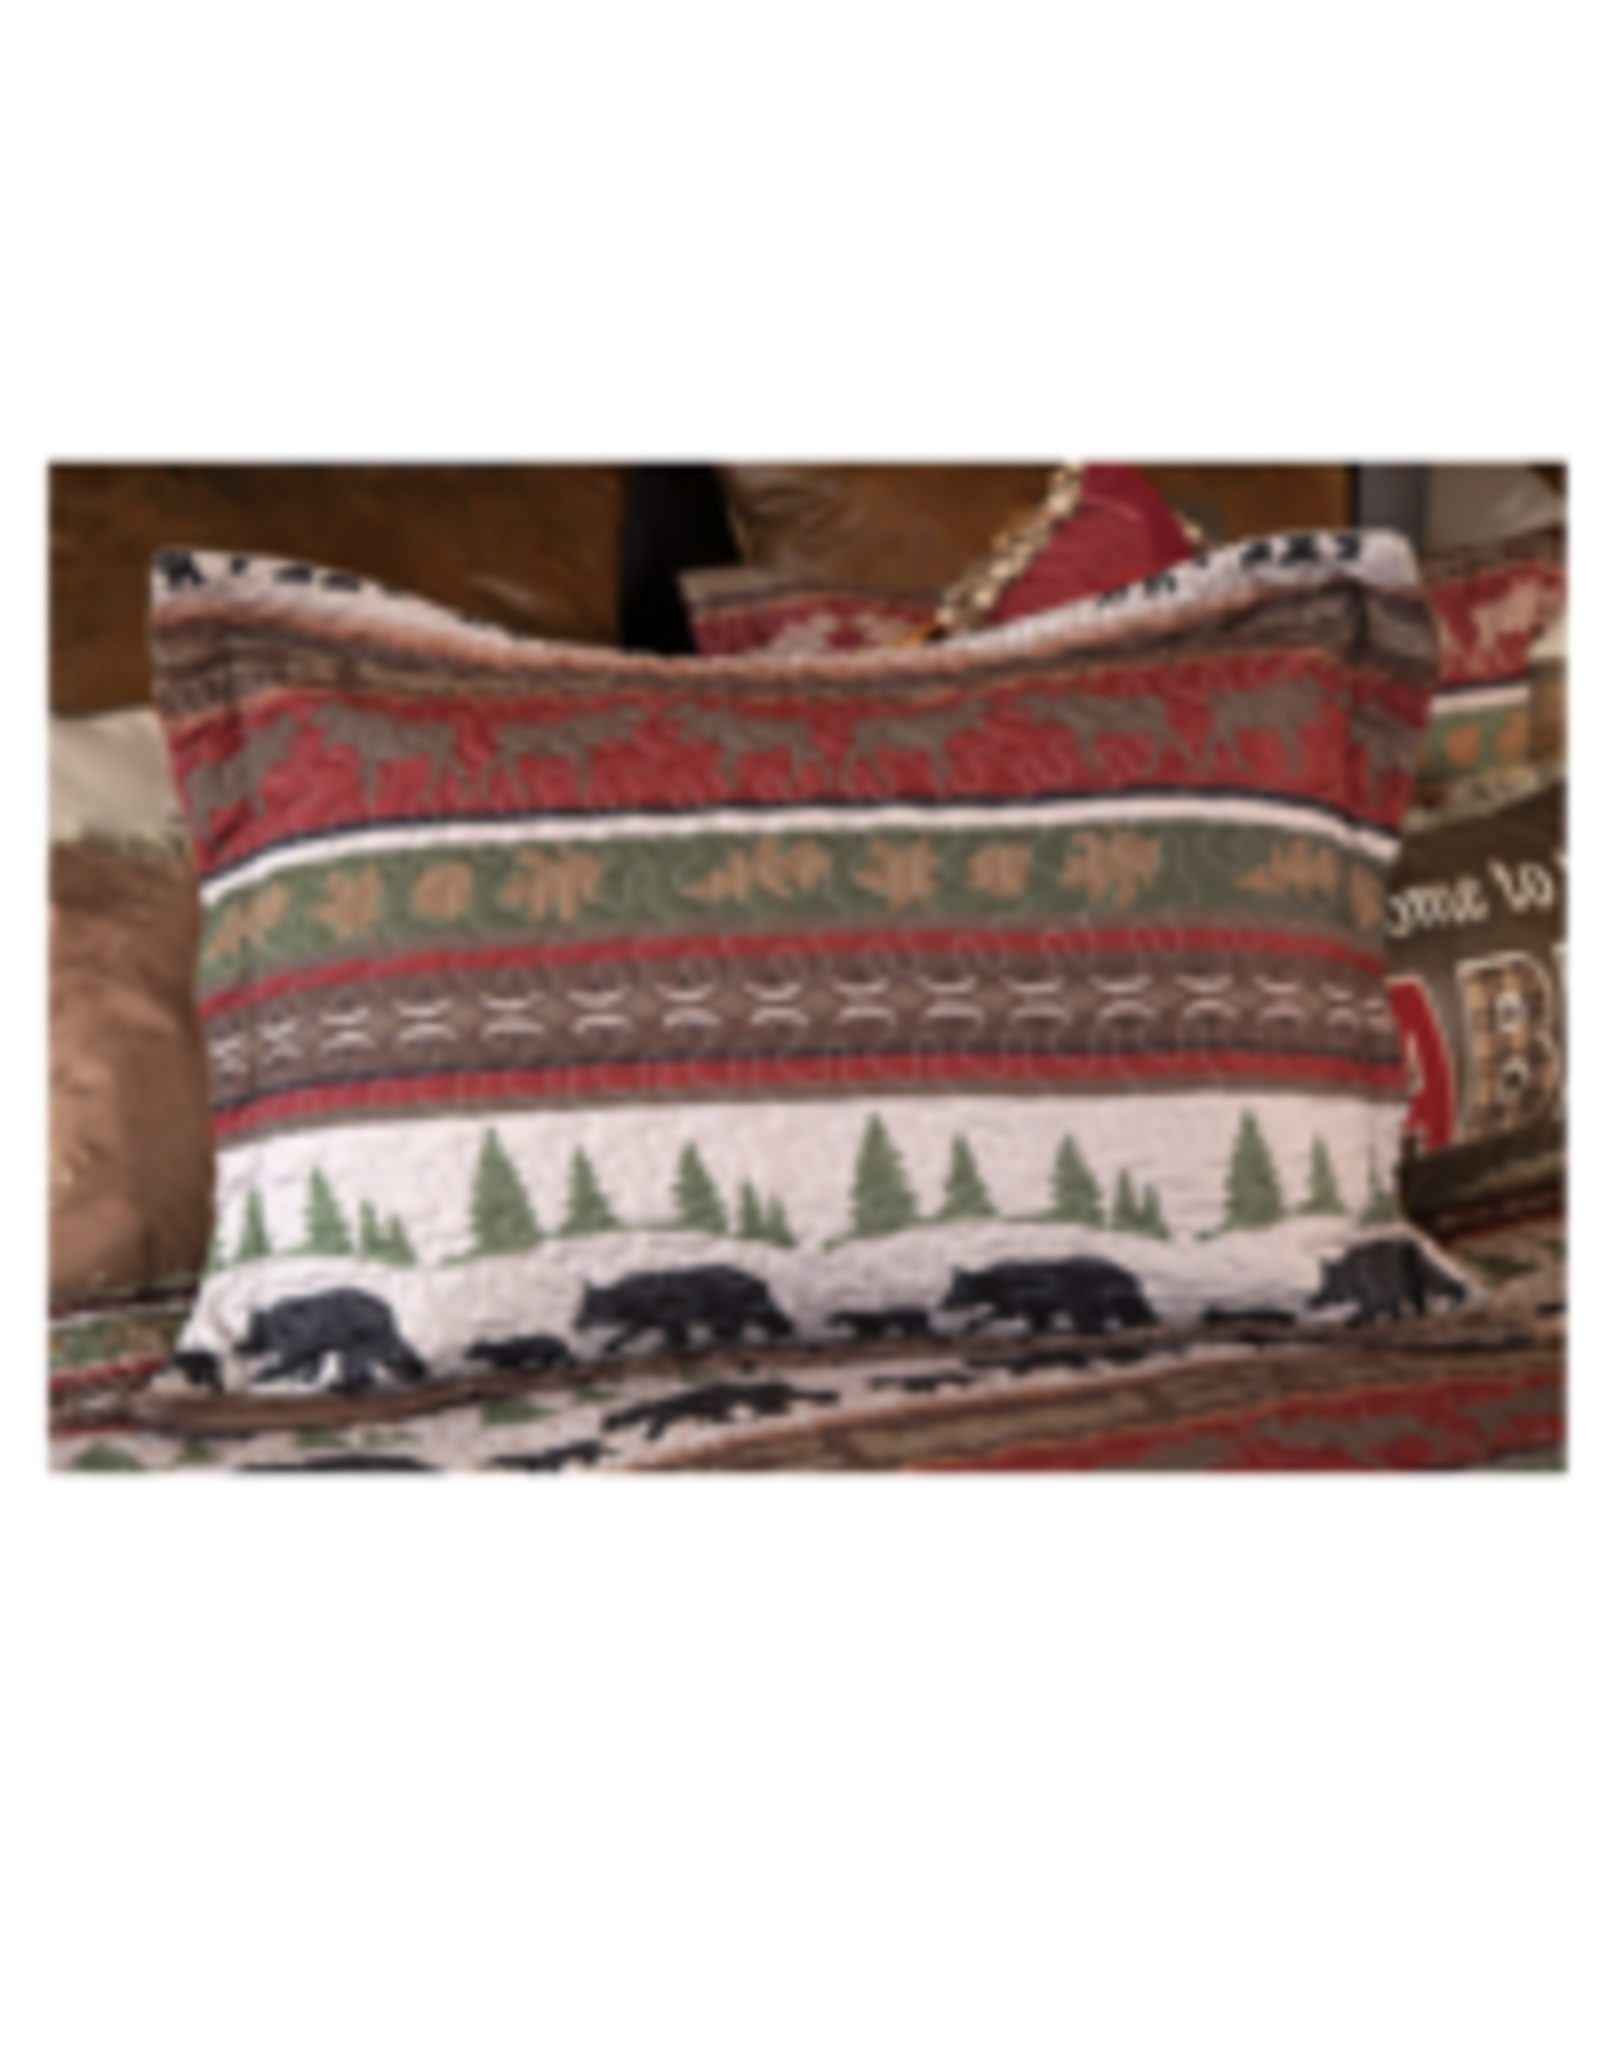 Carstens Cabin and Lodge Stripe Bed Set - King